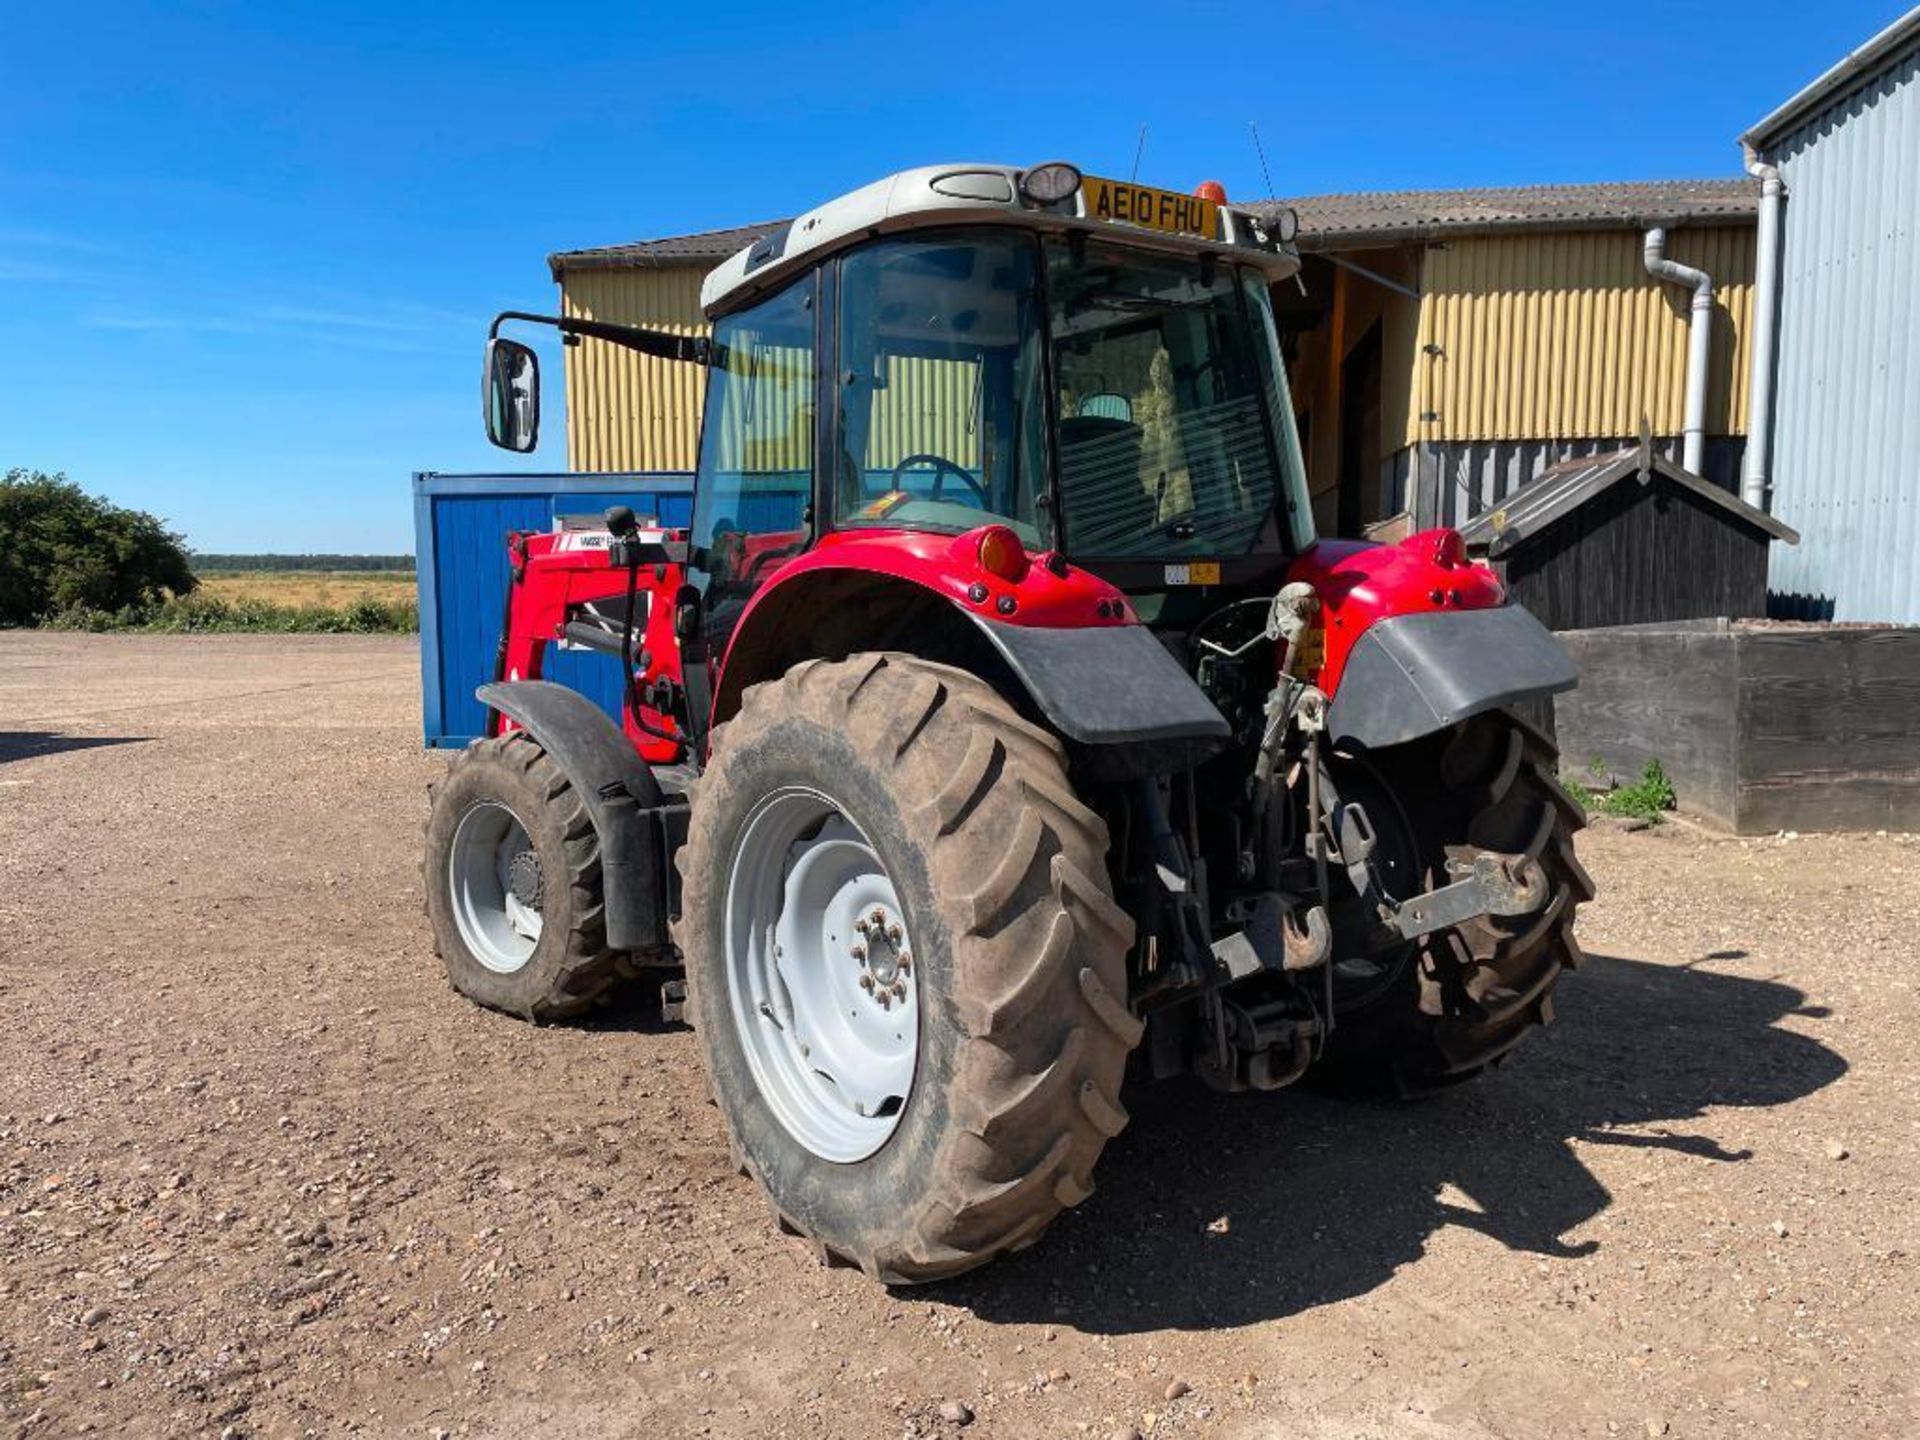 2010 Massey Ferguson 5455 4wd 40kph tractor with Massey Ferguson 945 front loader and pallet tines, - Image 5 of 19